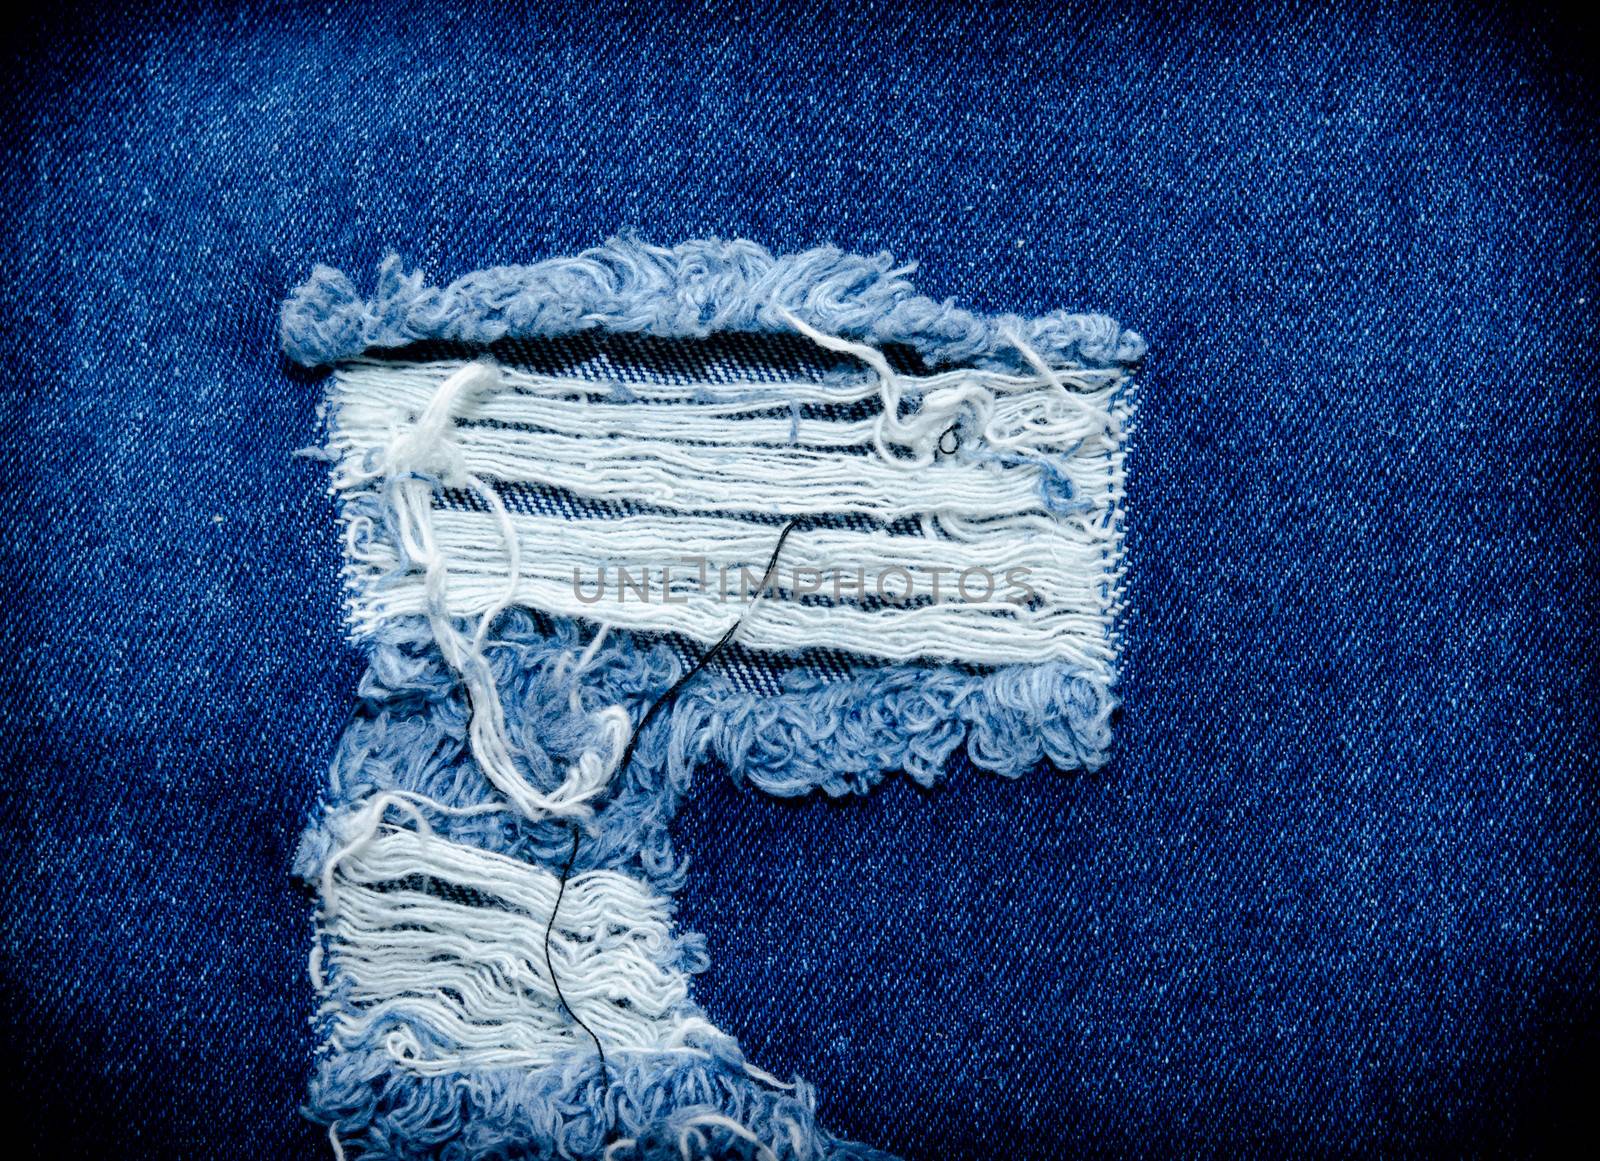 Blue jeans. I have a torn white yarn.